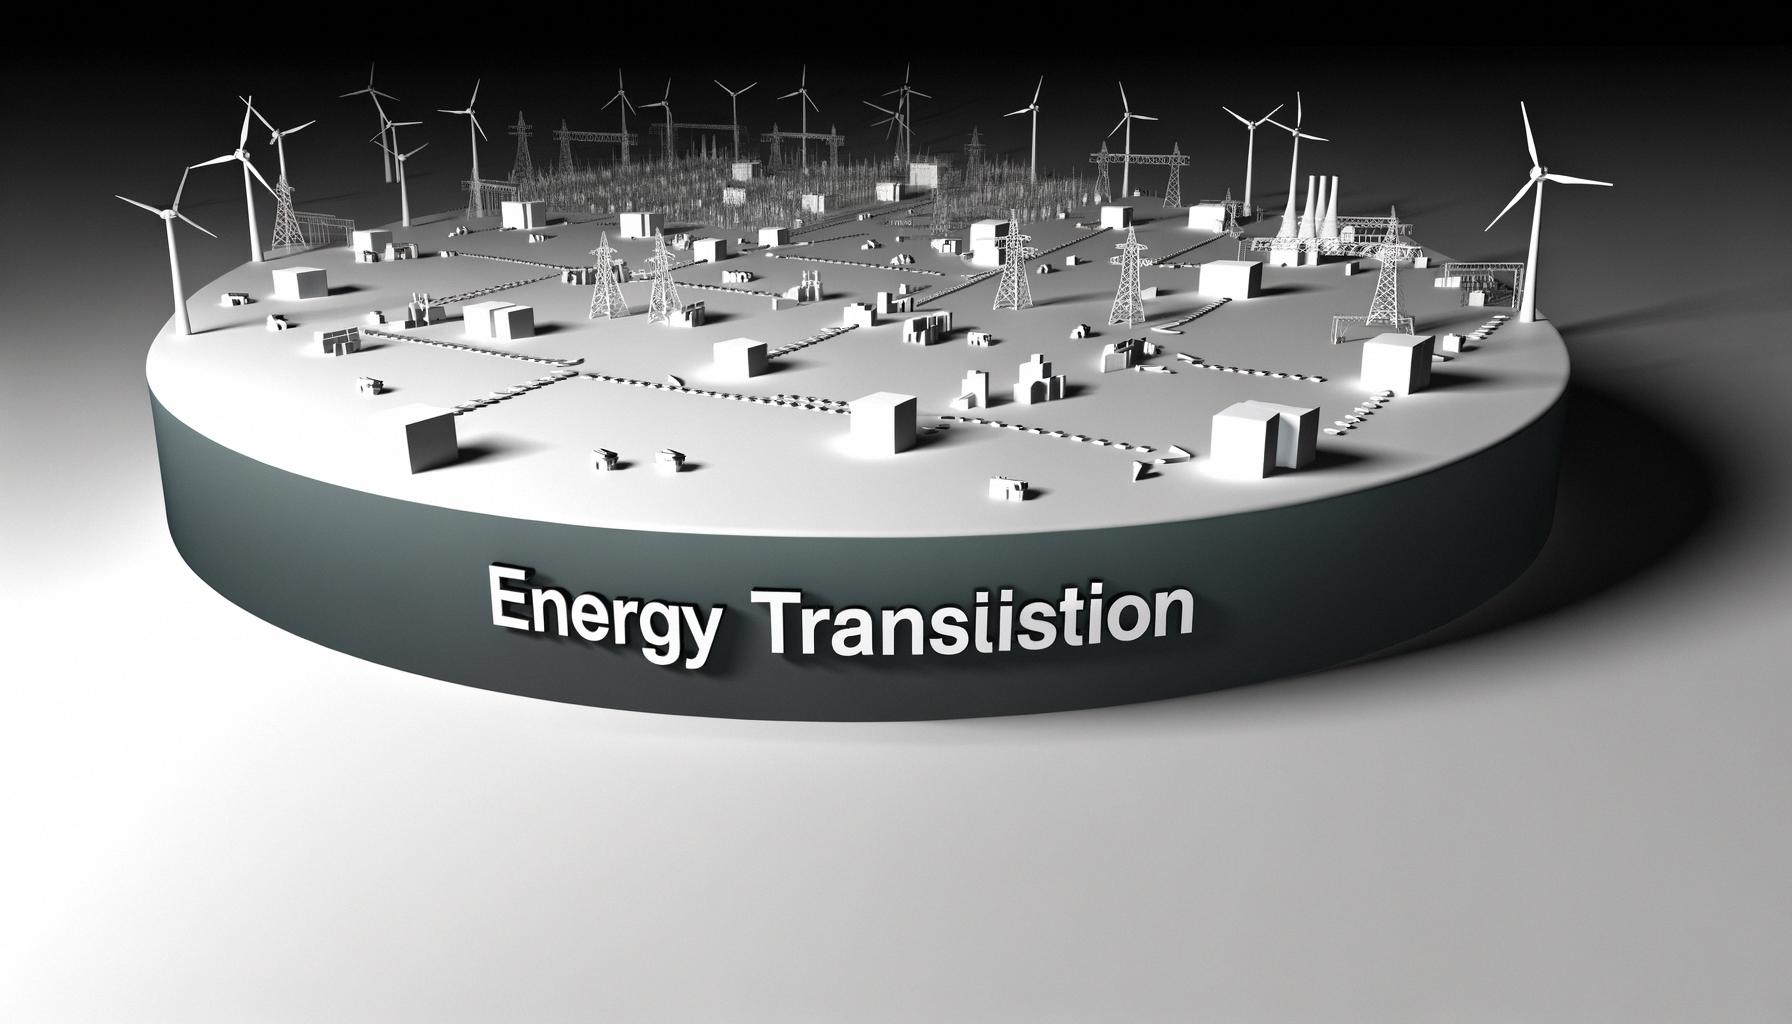 Energy transition facing significant challenges and opportunities Balanced News